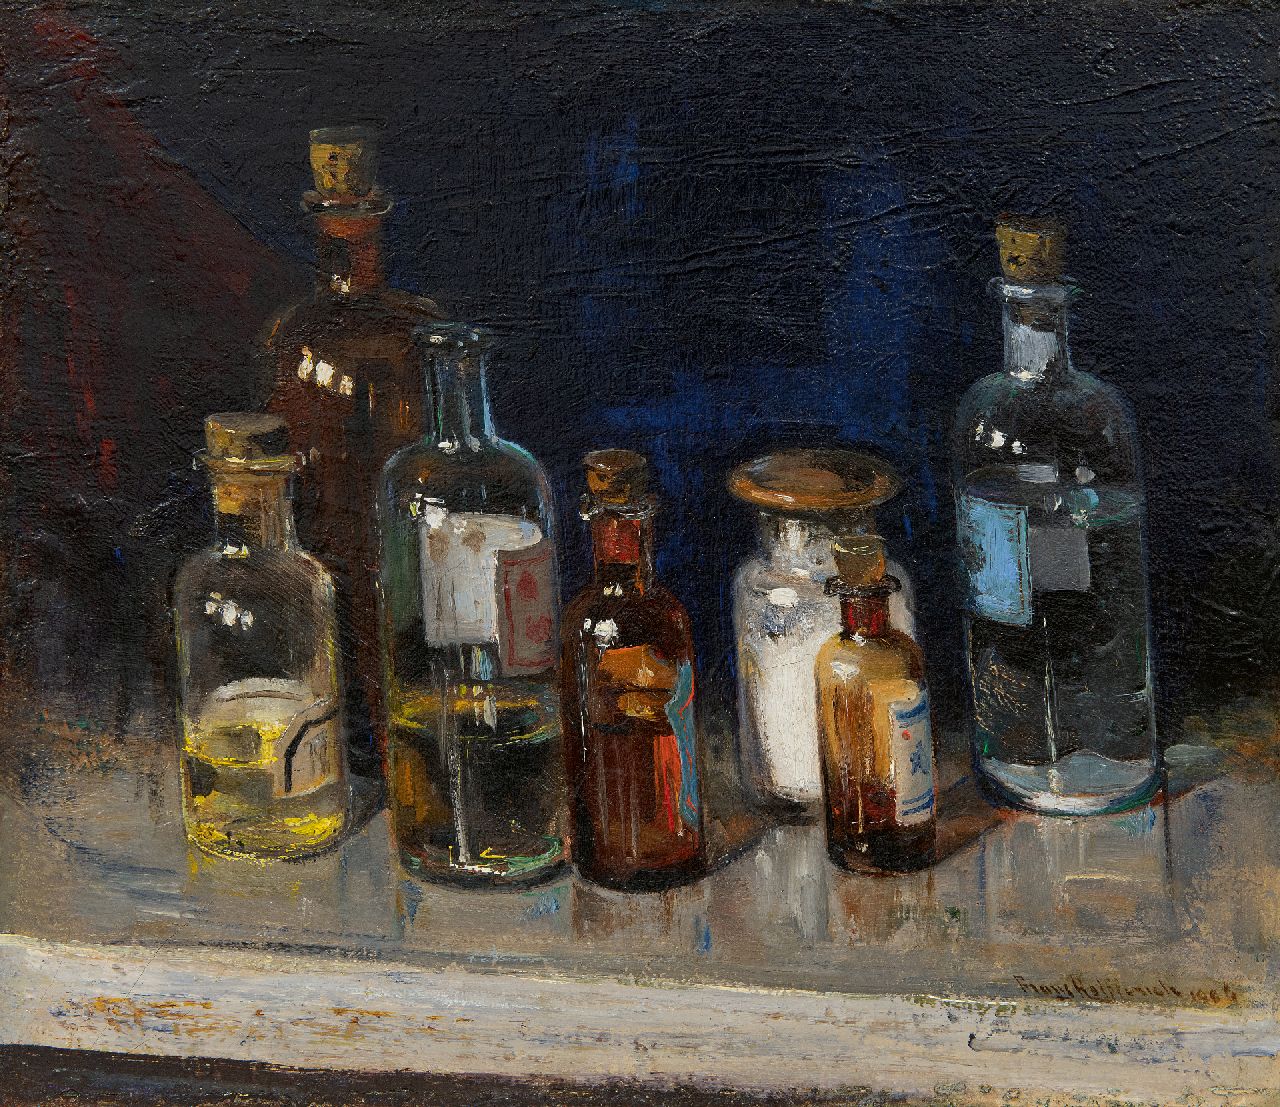 Helfferich F.W.  | Franciscus Willem 'Frans' Helfferich, Stil life with glass bottles, oil on canvas 30.2 x 34.5 cm, signed l.r. and dated 1906